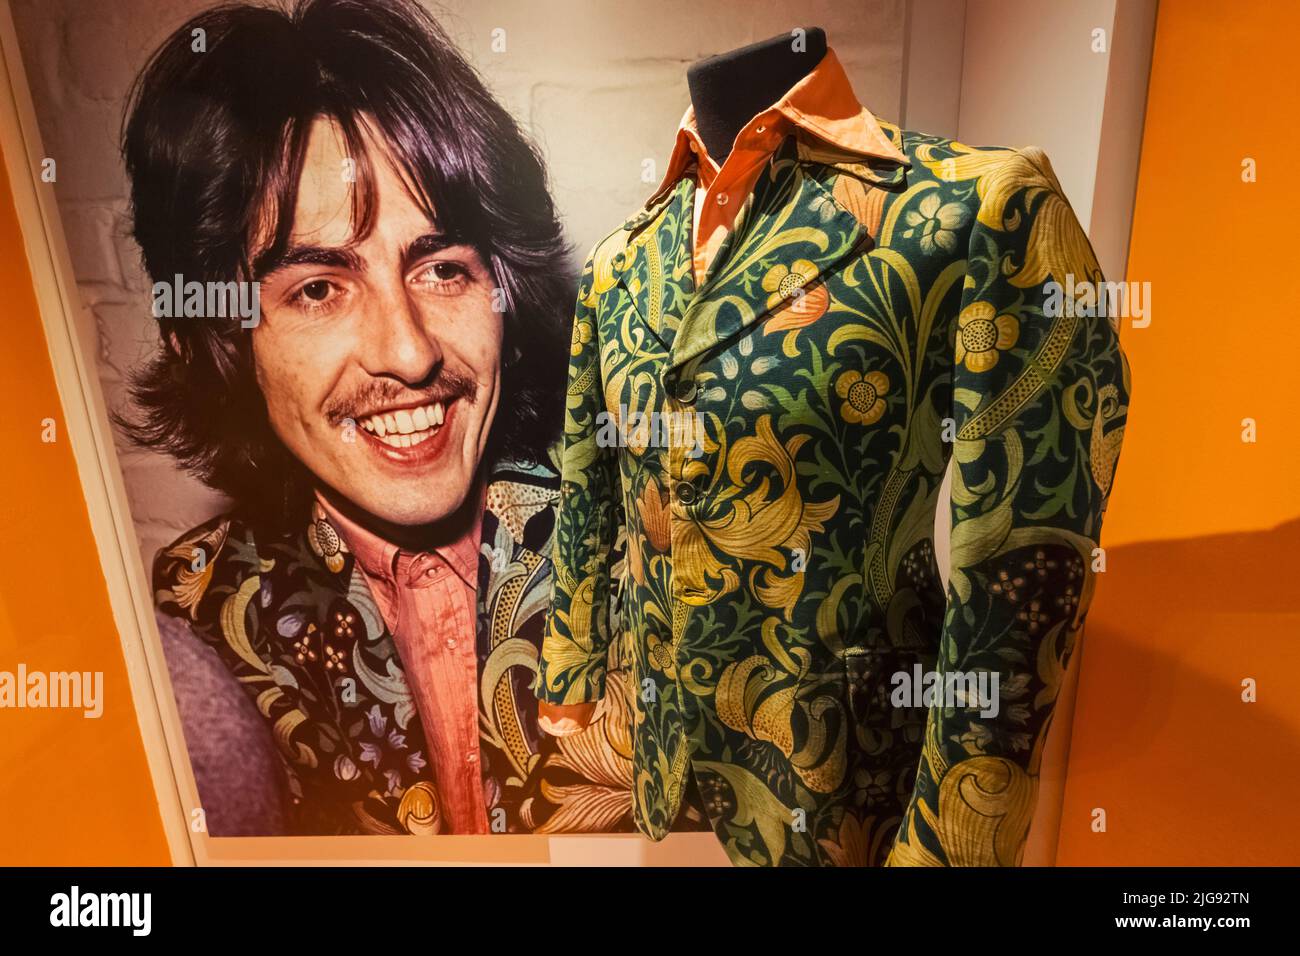 England, London, Southwark, Bermondsey, The Fashion and Textile Museum, Exhibit of 1960's Jacket worn by George Harrison of The Beatles Stock Photo